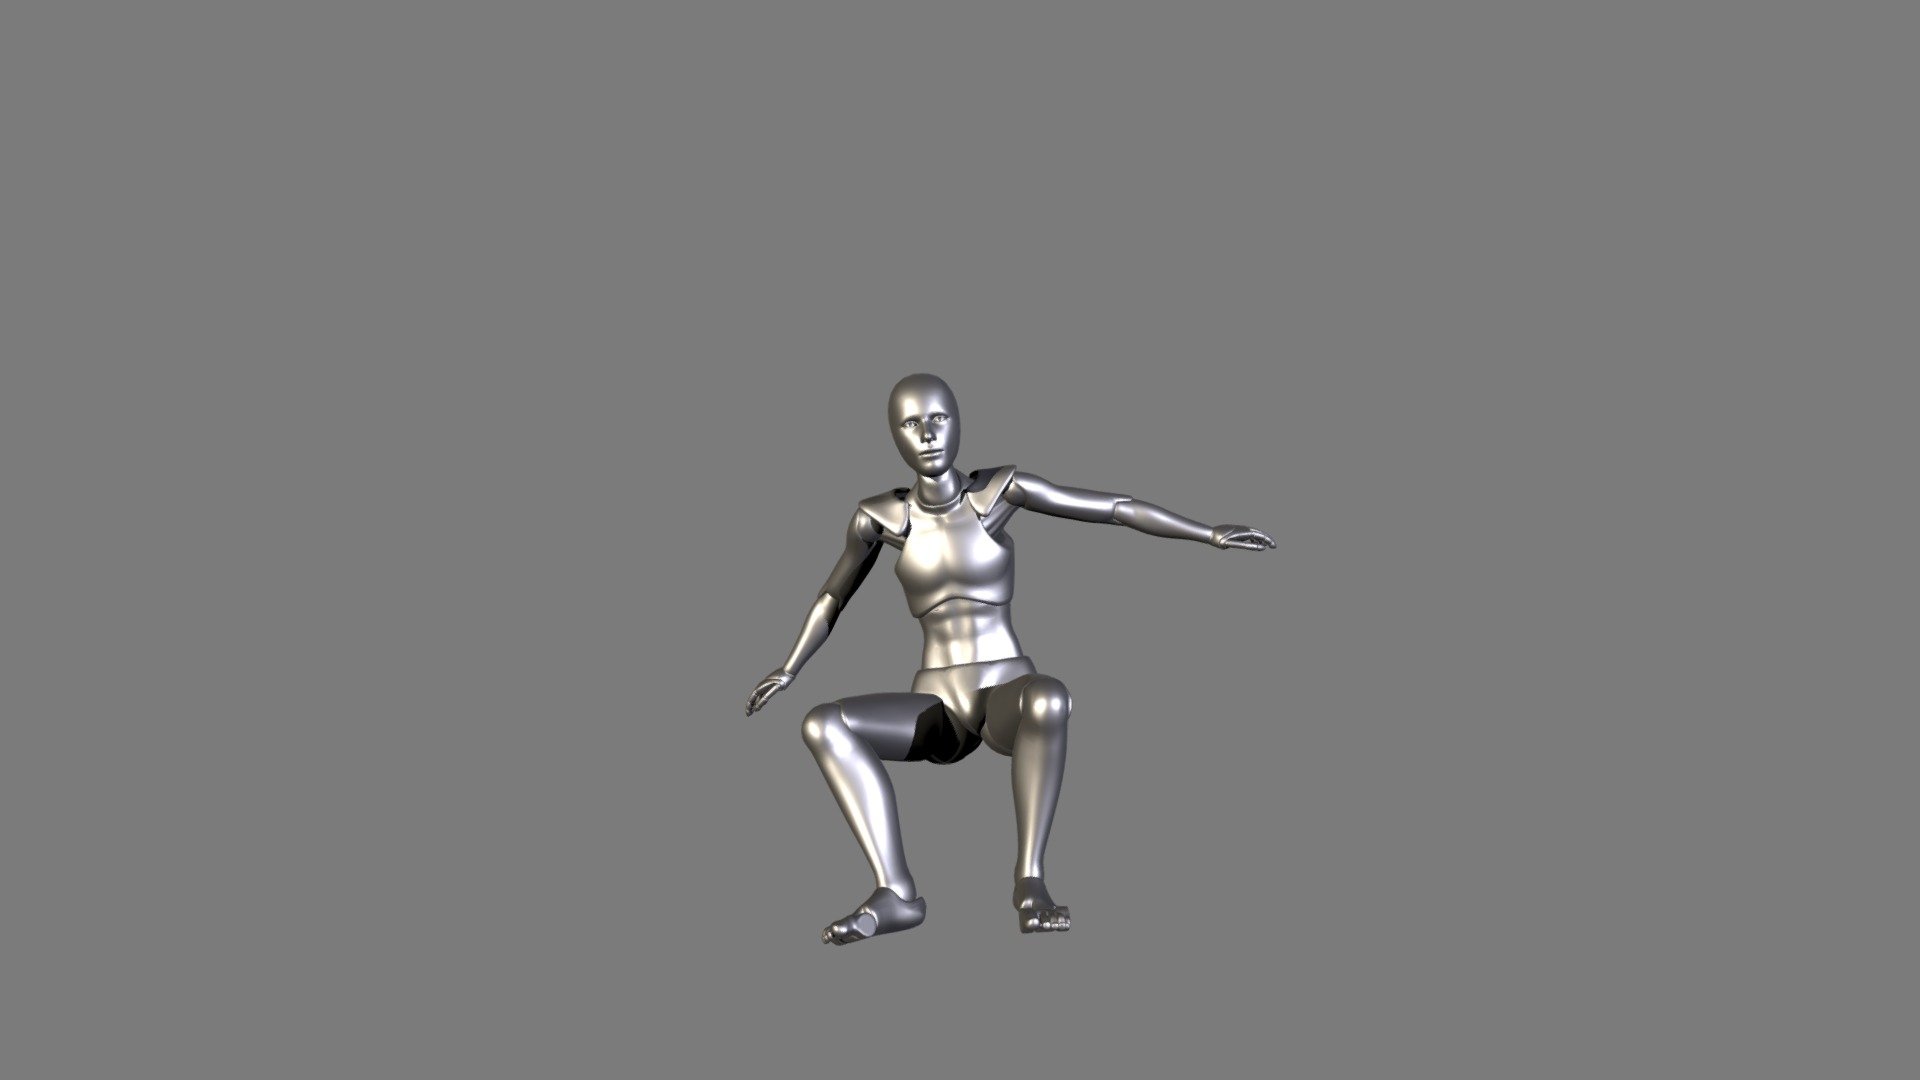 Standing Taking Shot 3d Model By Centroid Motion Capture Centroid 8400e2f Sketchfab 0861